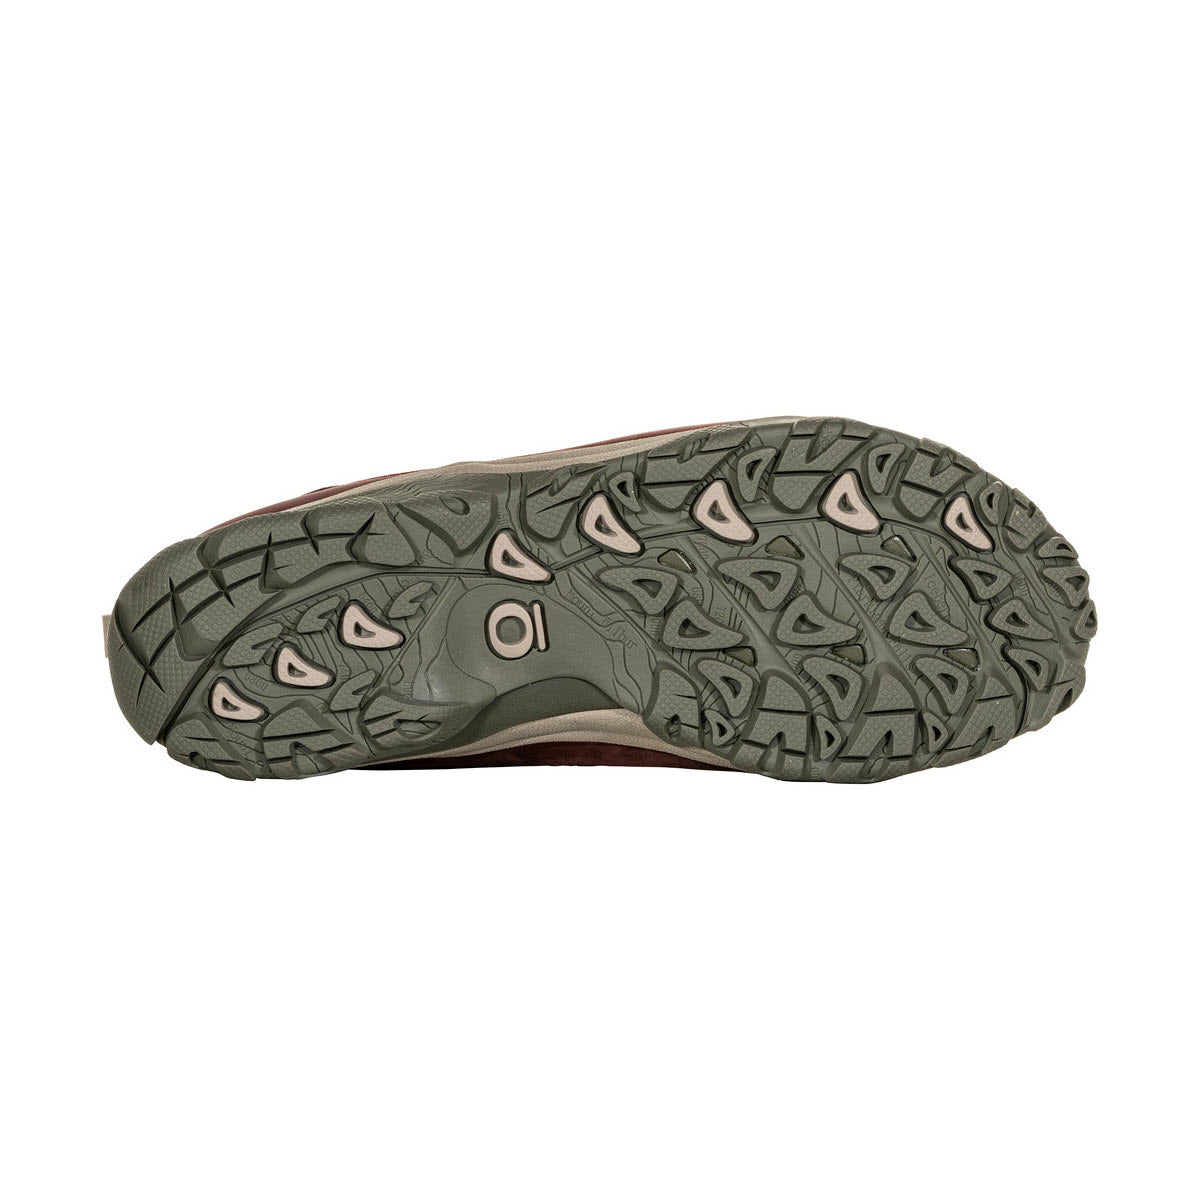 Sole of a waterproof OBOZ OUSEL MID B-DRY PORT shoe with intricate triangular and line patterns in shades of olive and brown.